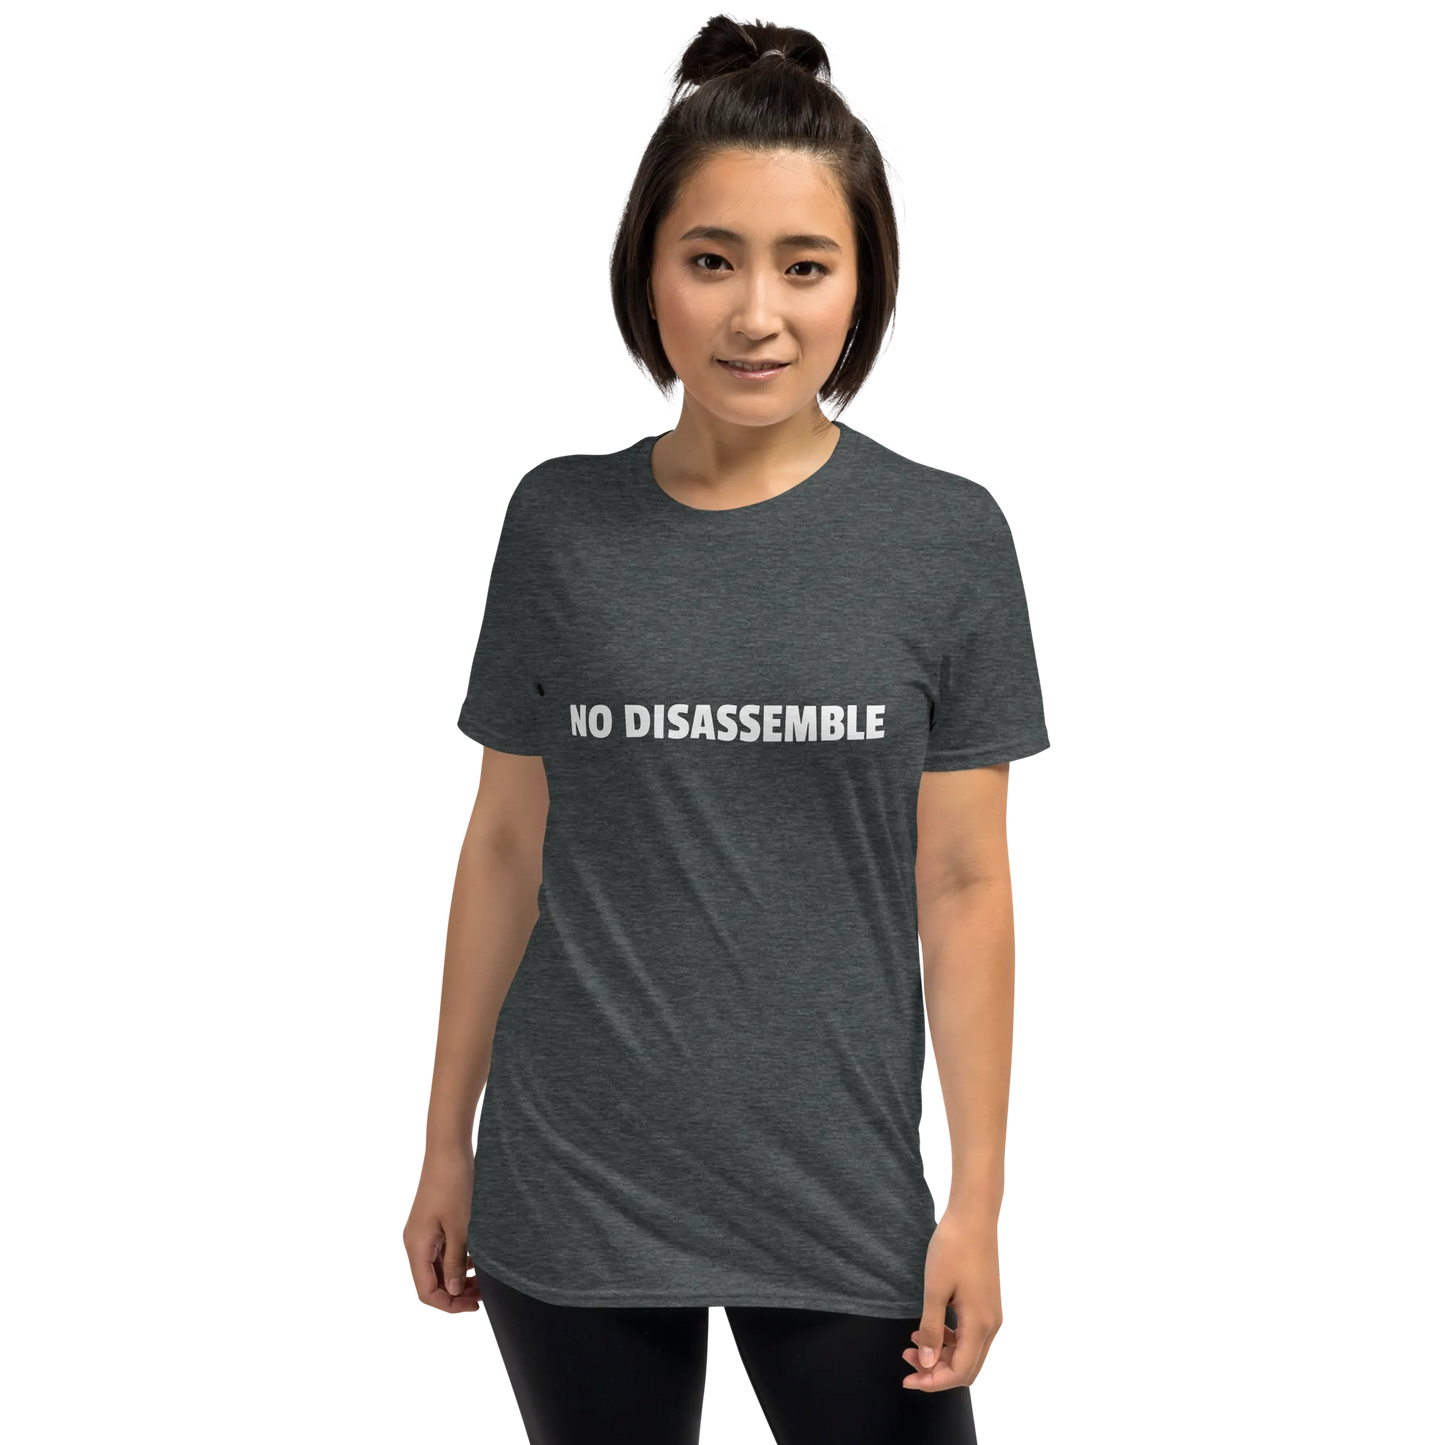 No Disassemble Tee in Dark Heather Grey on woman front